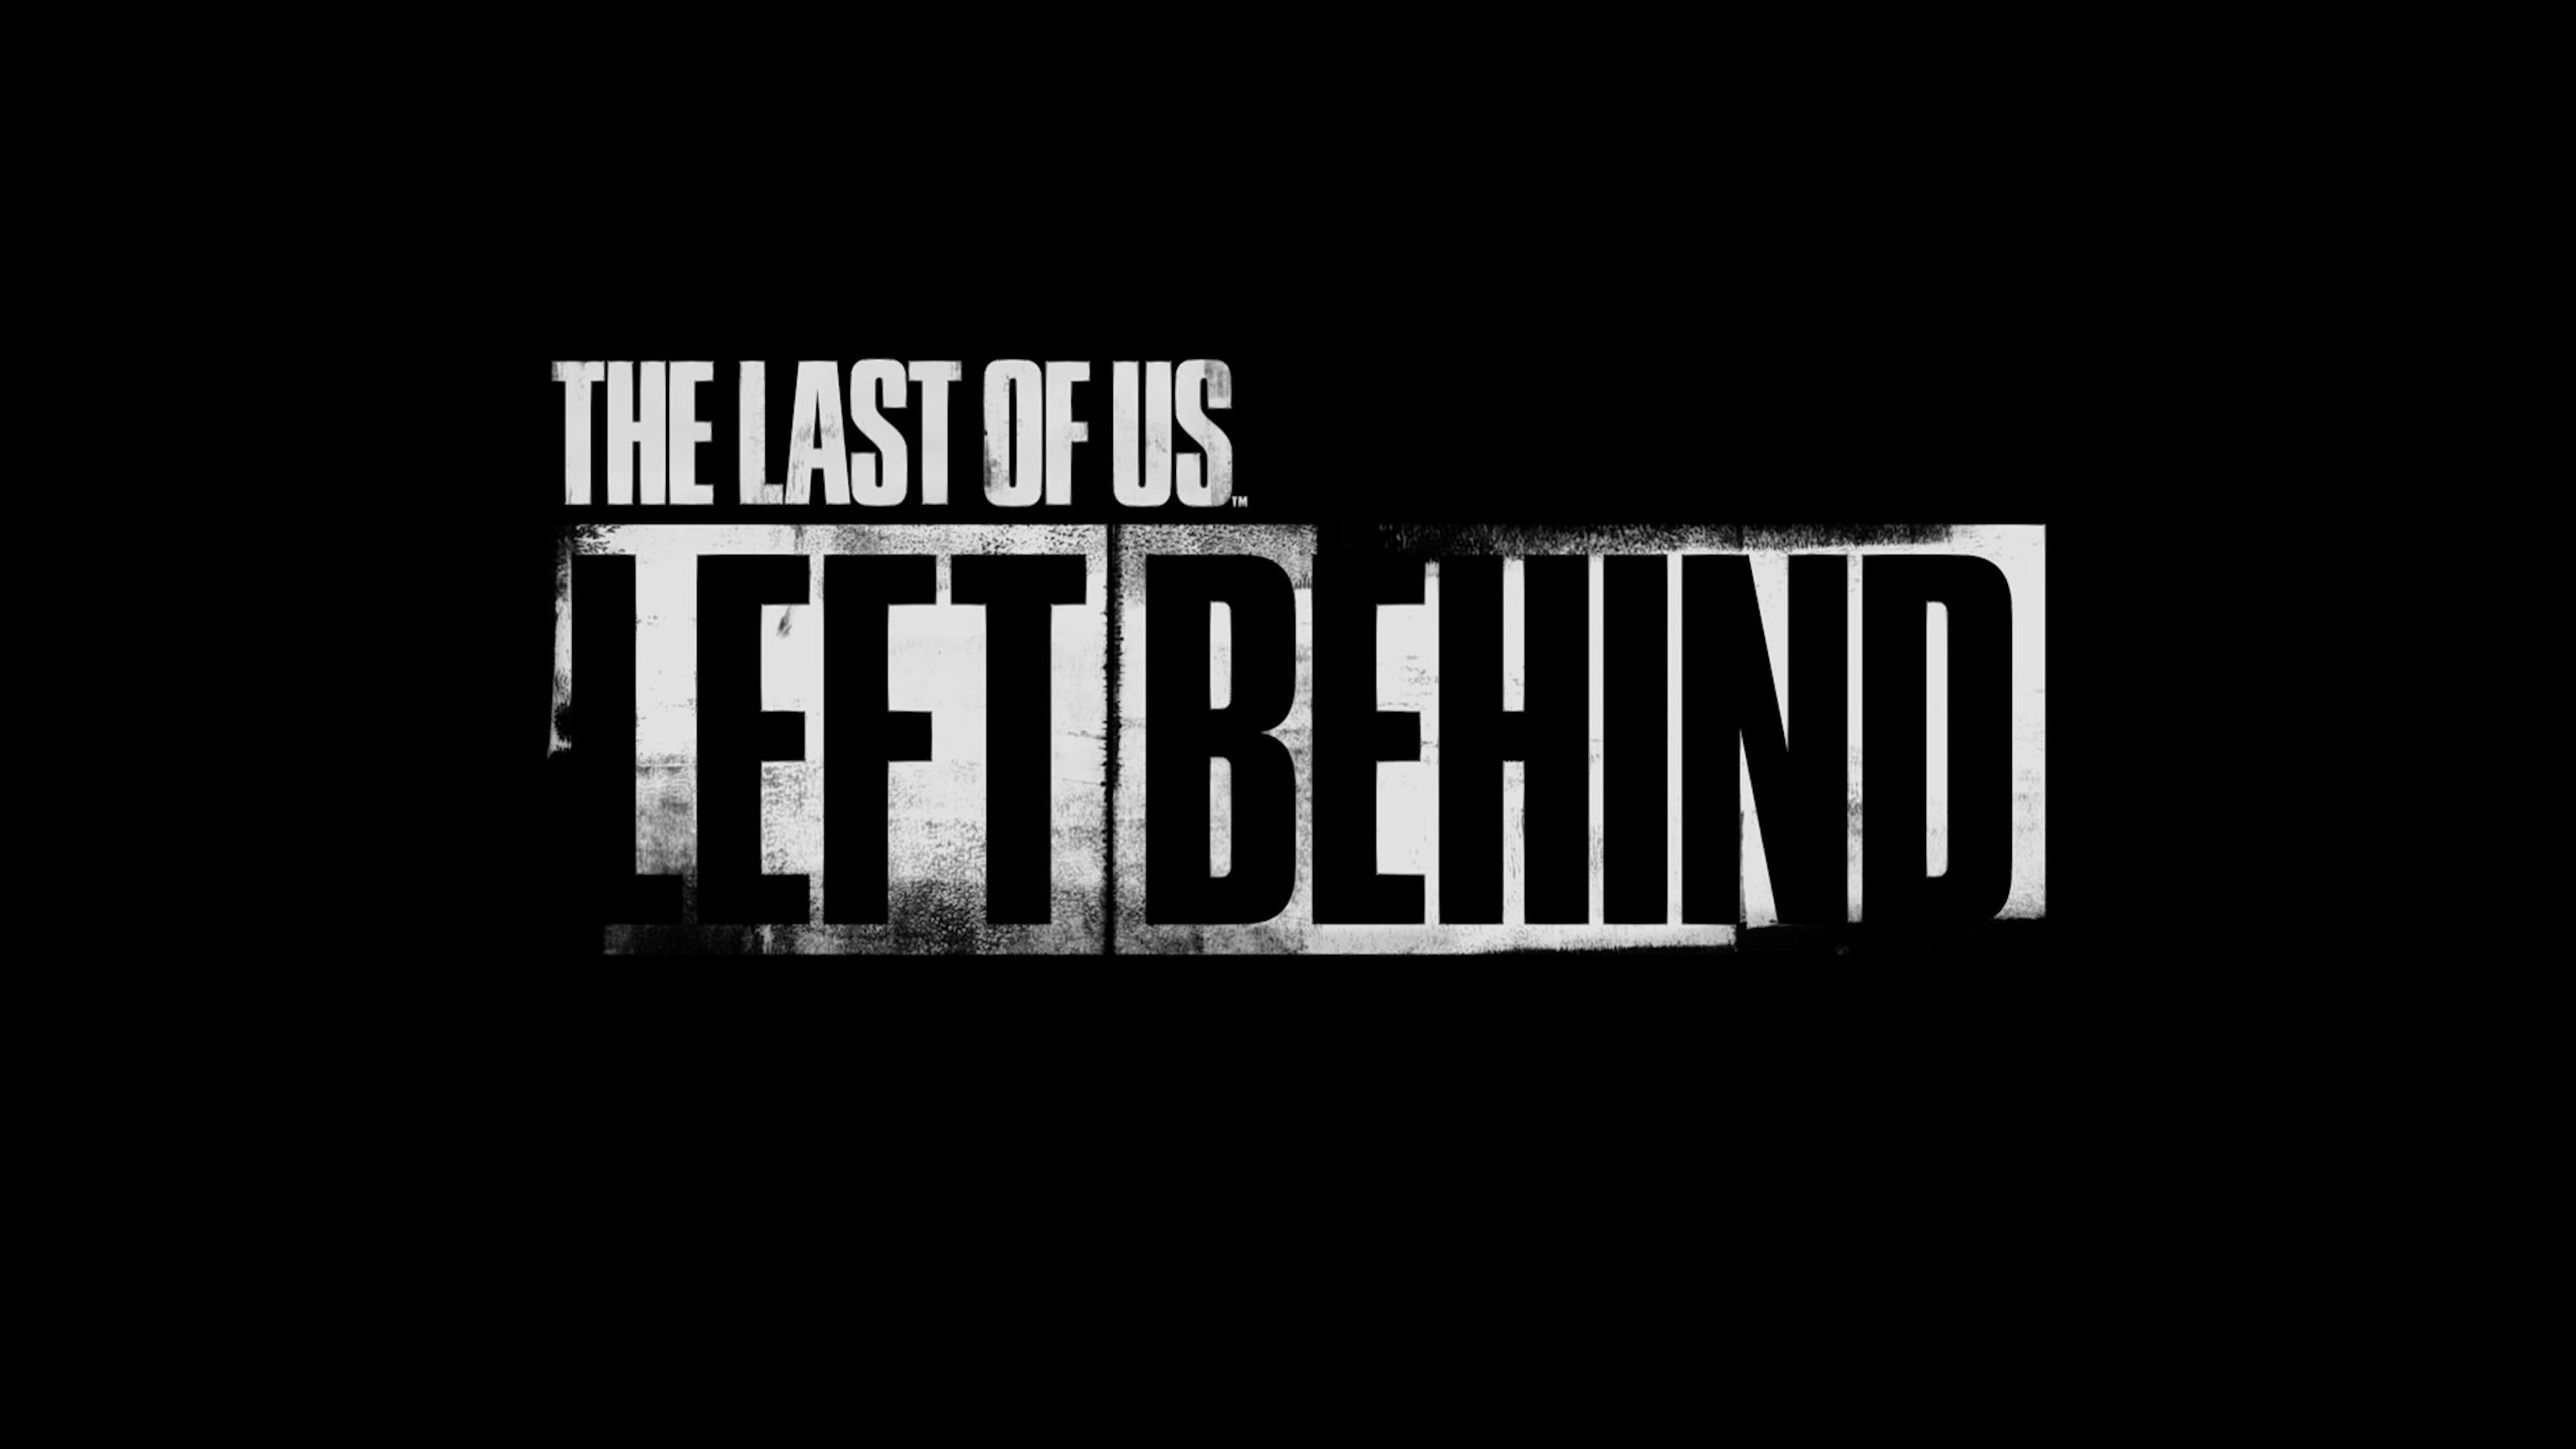 The Last of Us: Left Behind. The Last of Us